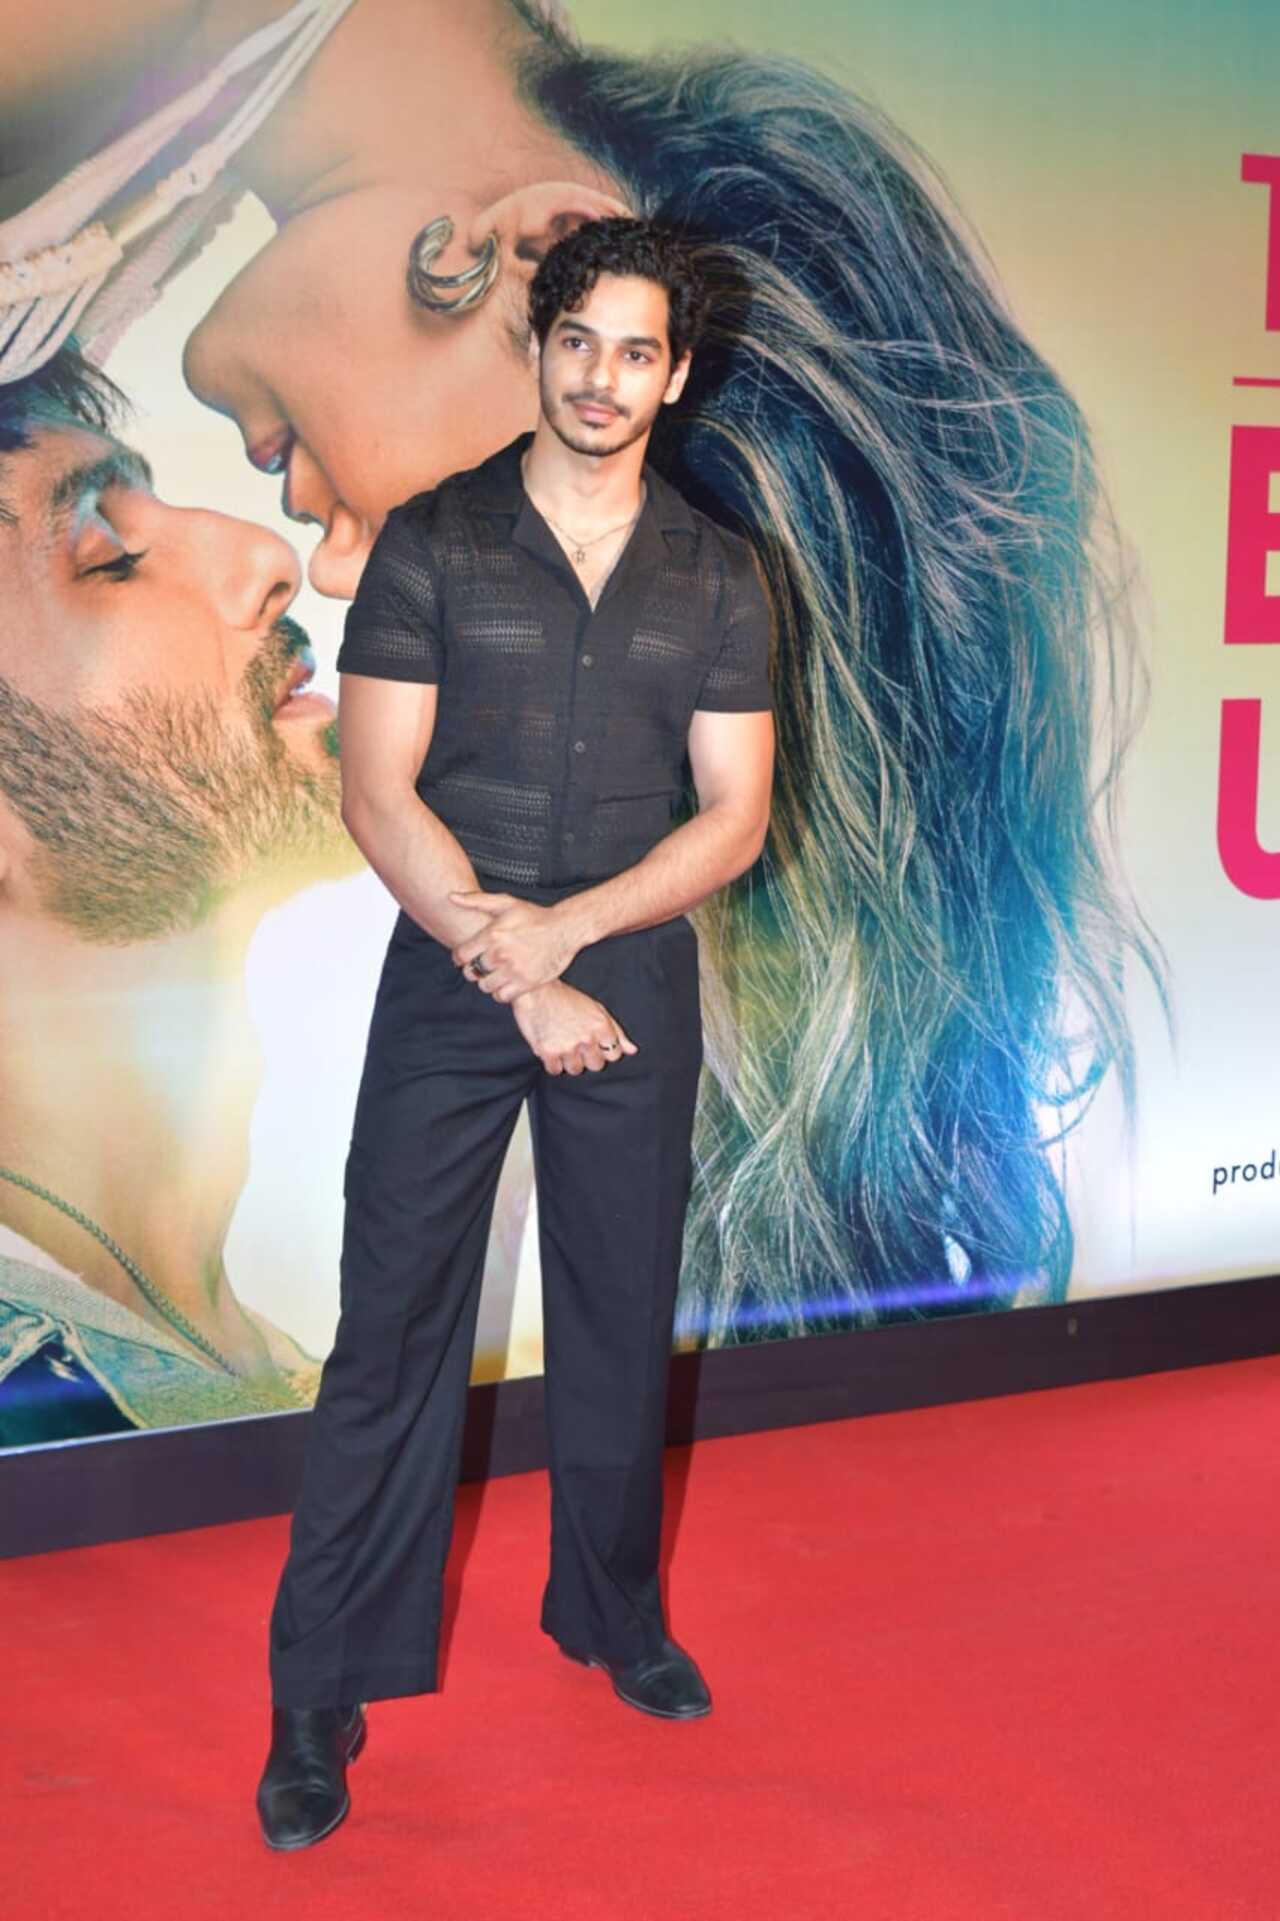 Shahid Kapoor's younger brother Ishaan Khatter looked dapper in a sheer black shirt and pants